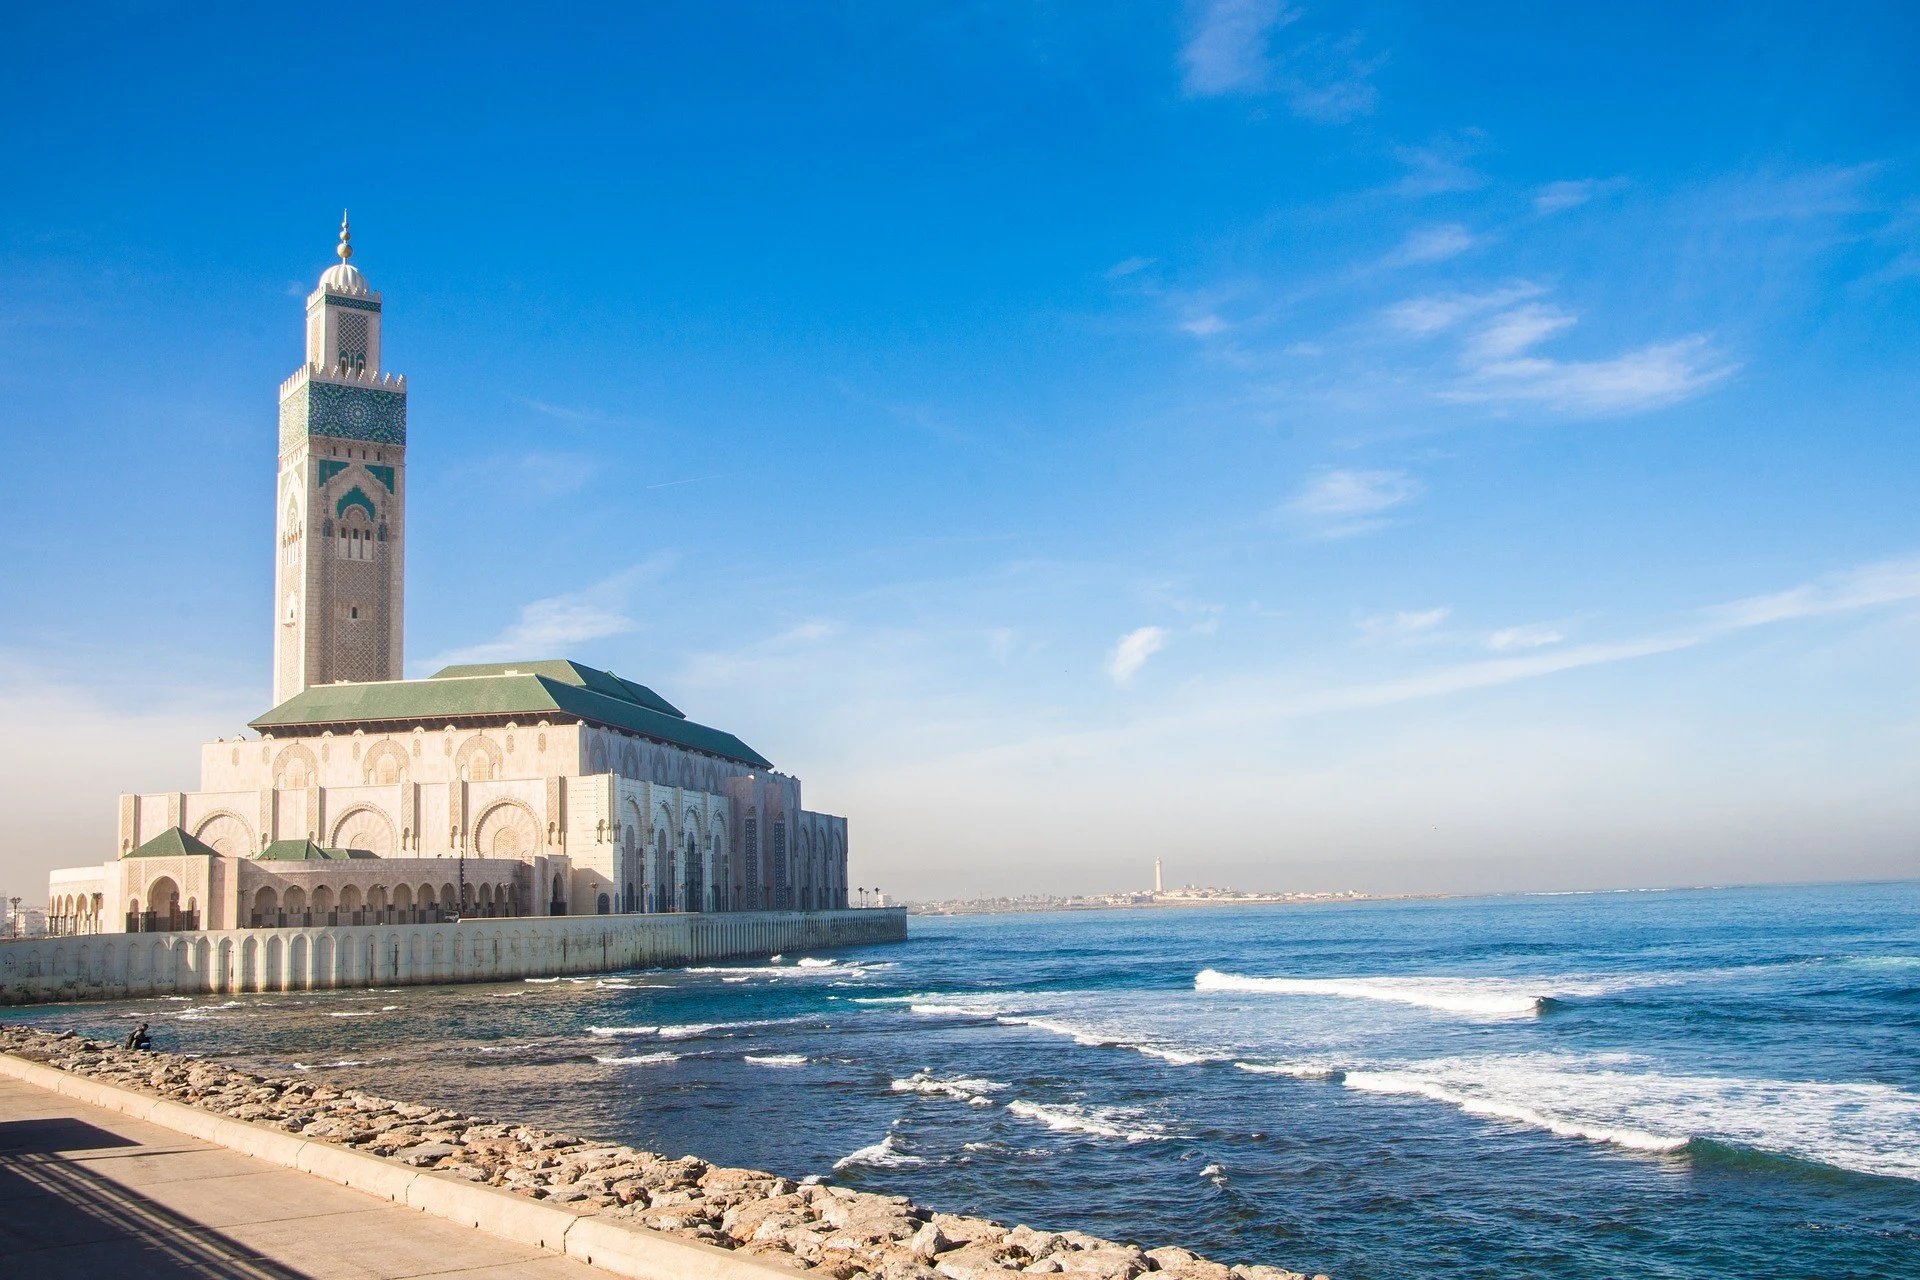 Things to do in Casablanca, Morocco - 5 of the best reasons to visit!